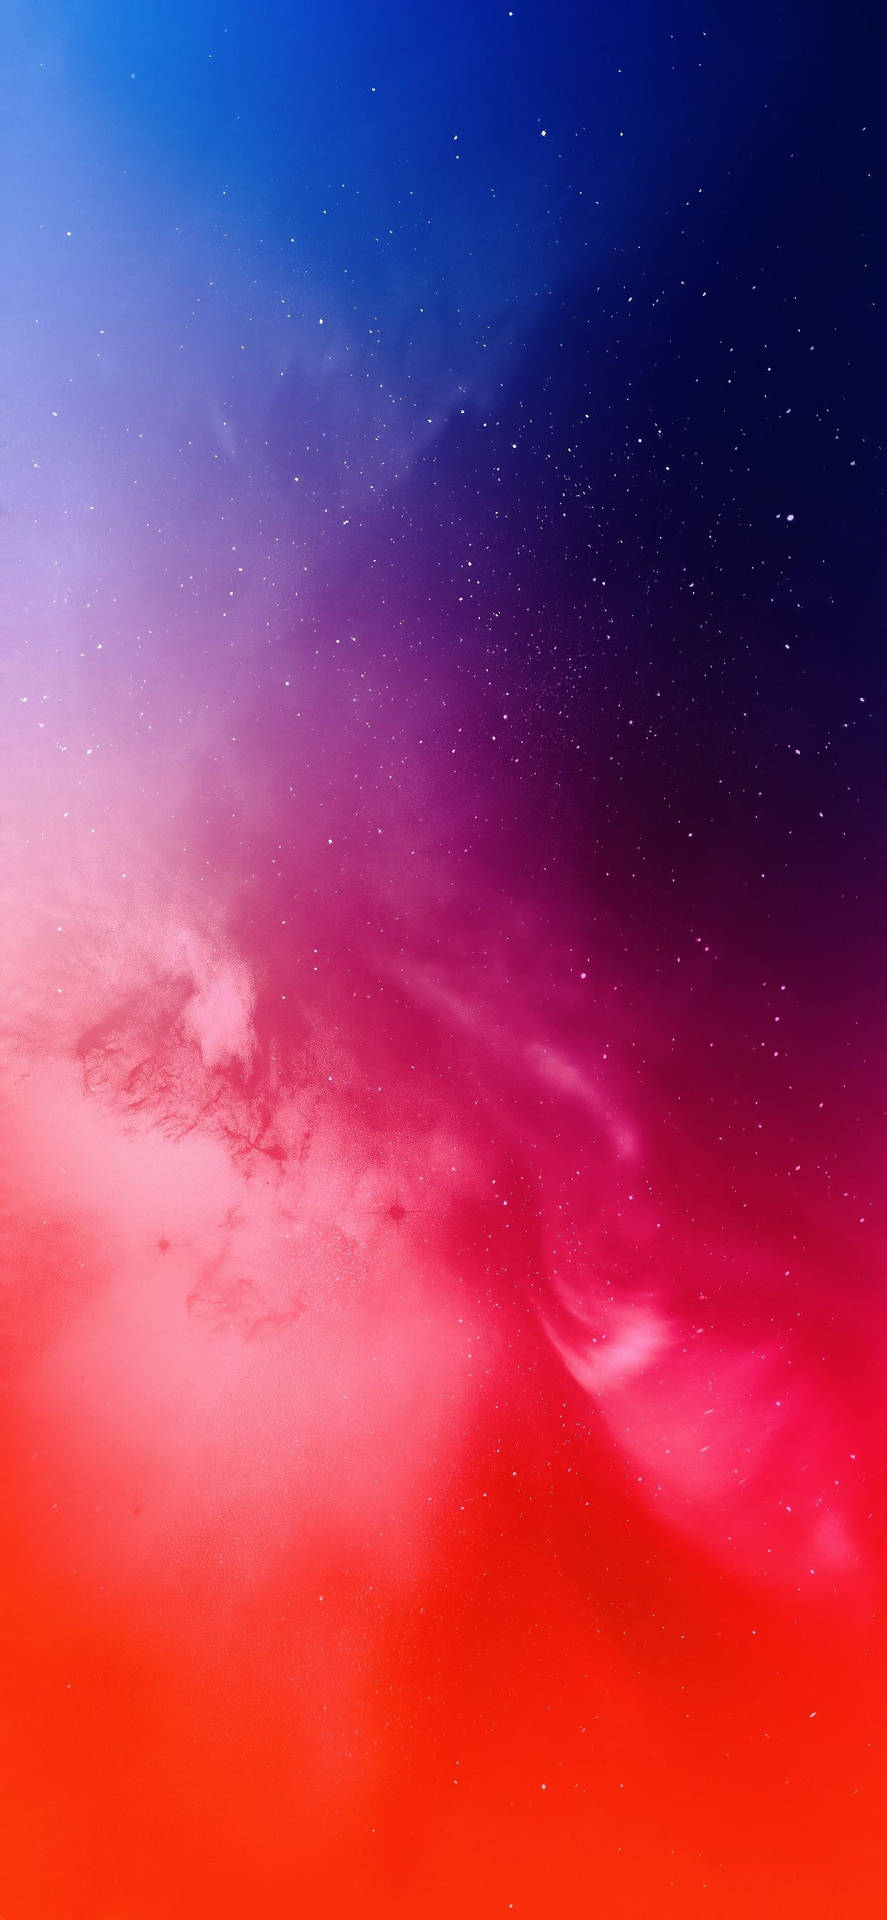 Colorful Space Iphone 11 Pro Max